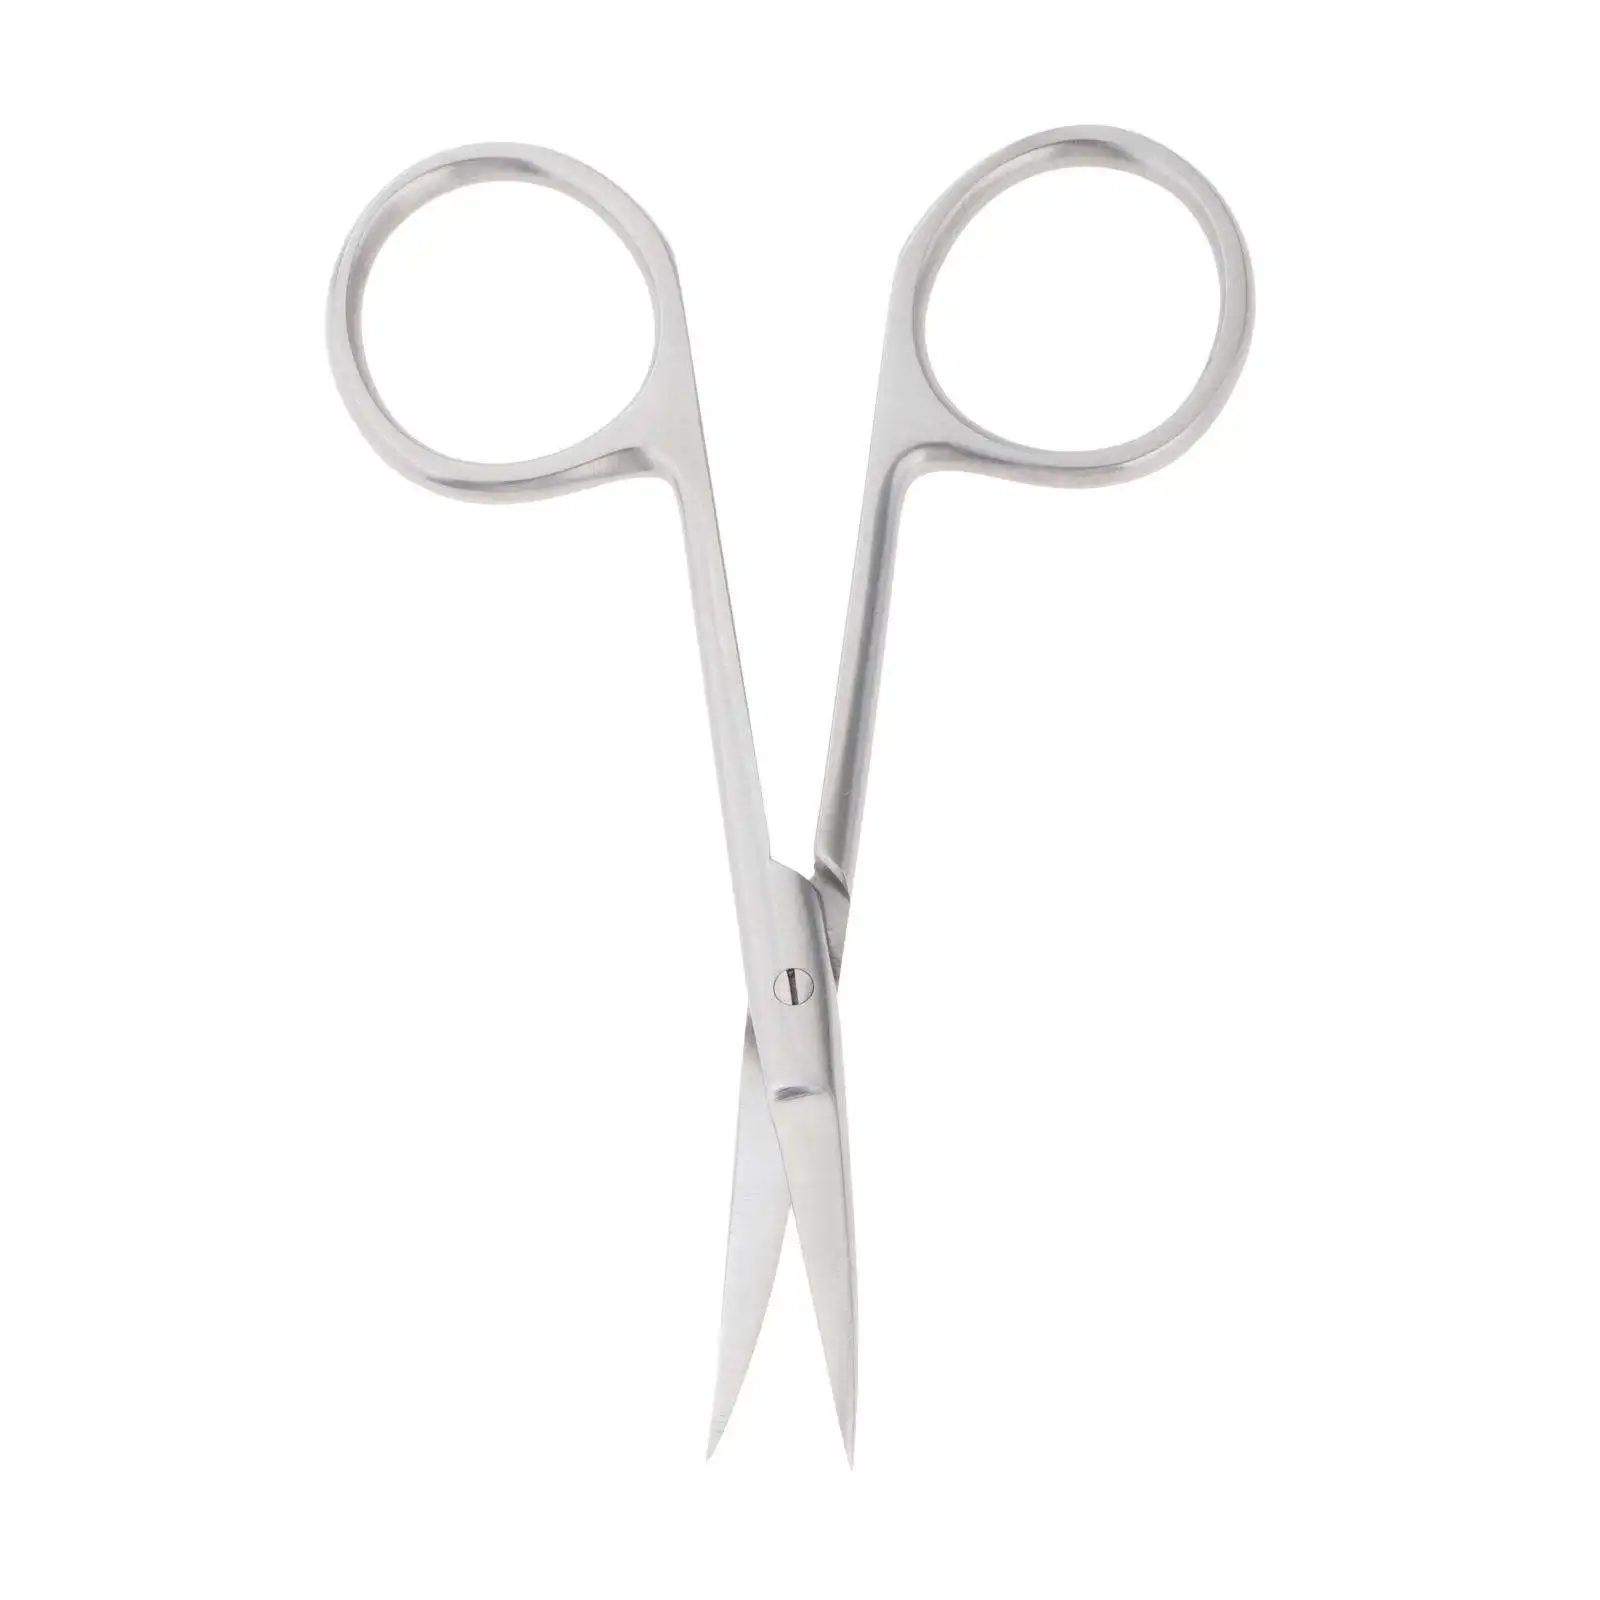 Cuticle Scissors Compact Curved Safety Use Professional Trimming Scissors for Eyelashes Nose Beard Eyebrows Travel Home Use